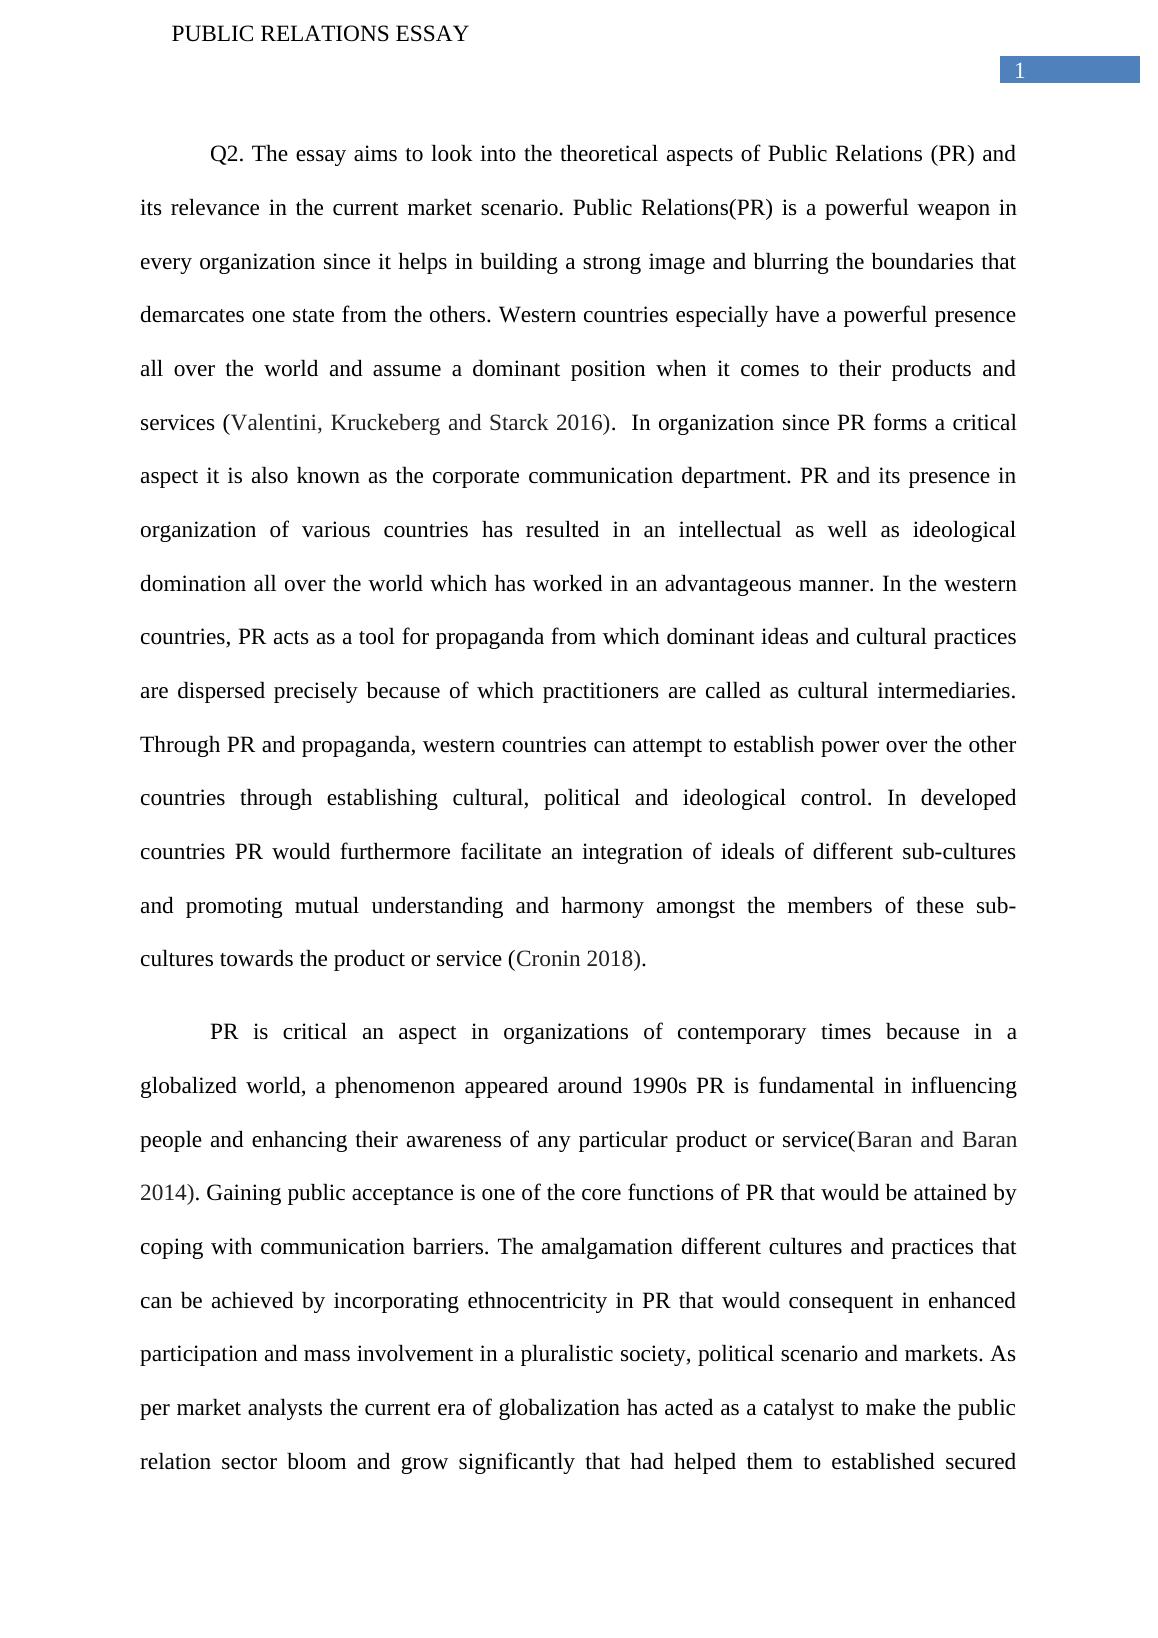 Essay on Public Relations Aspects_2